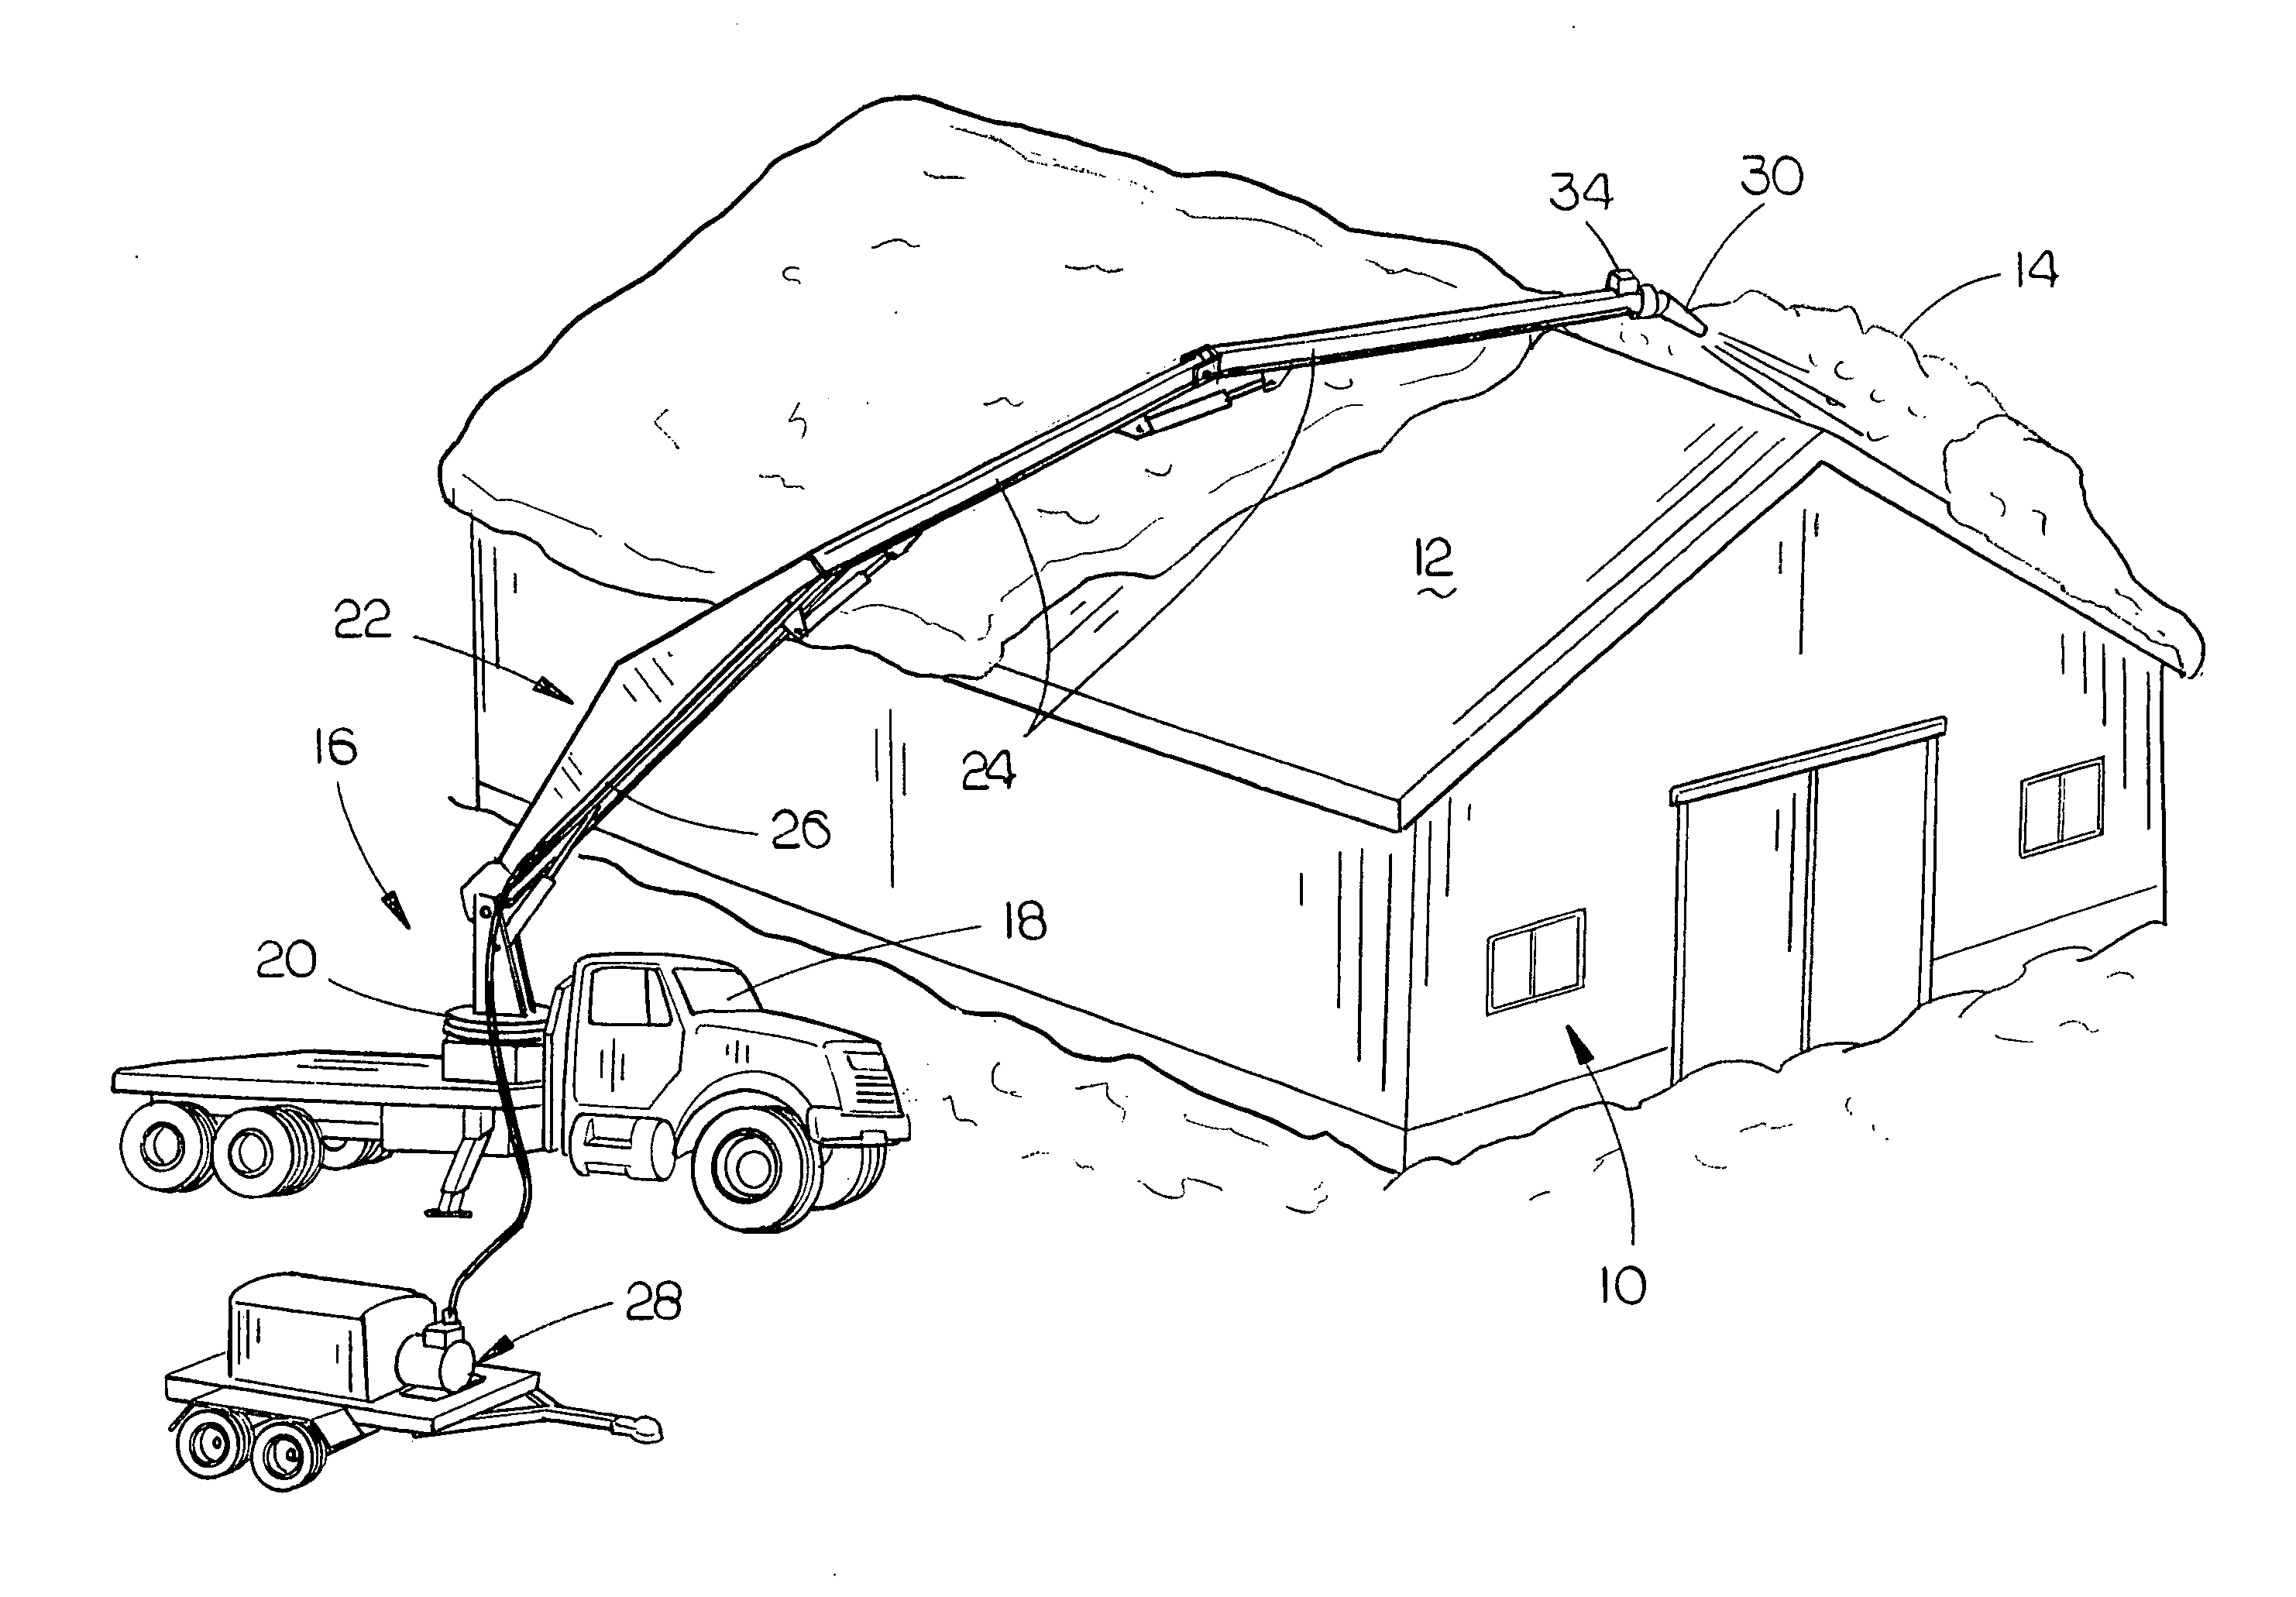 Method and means for removing snow from the roof of a building